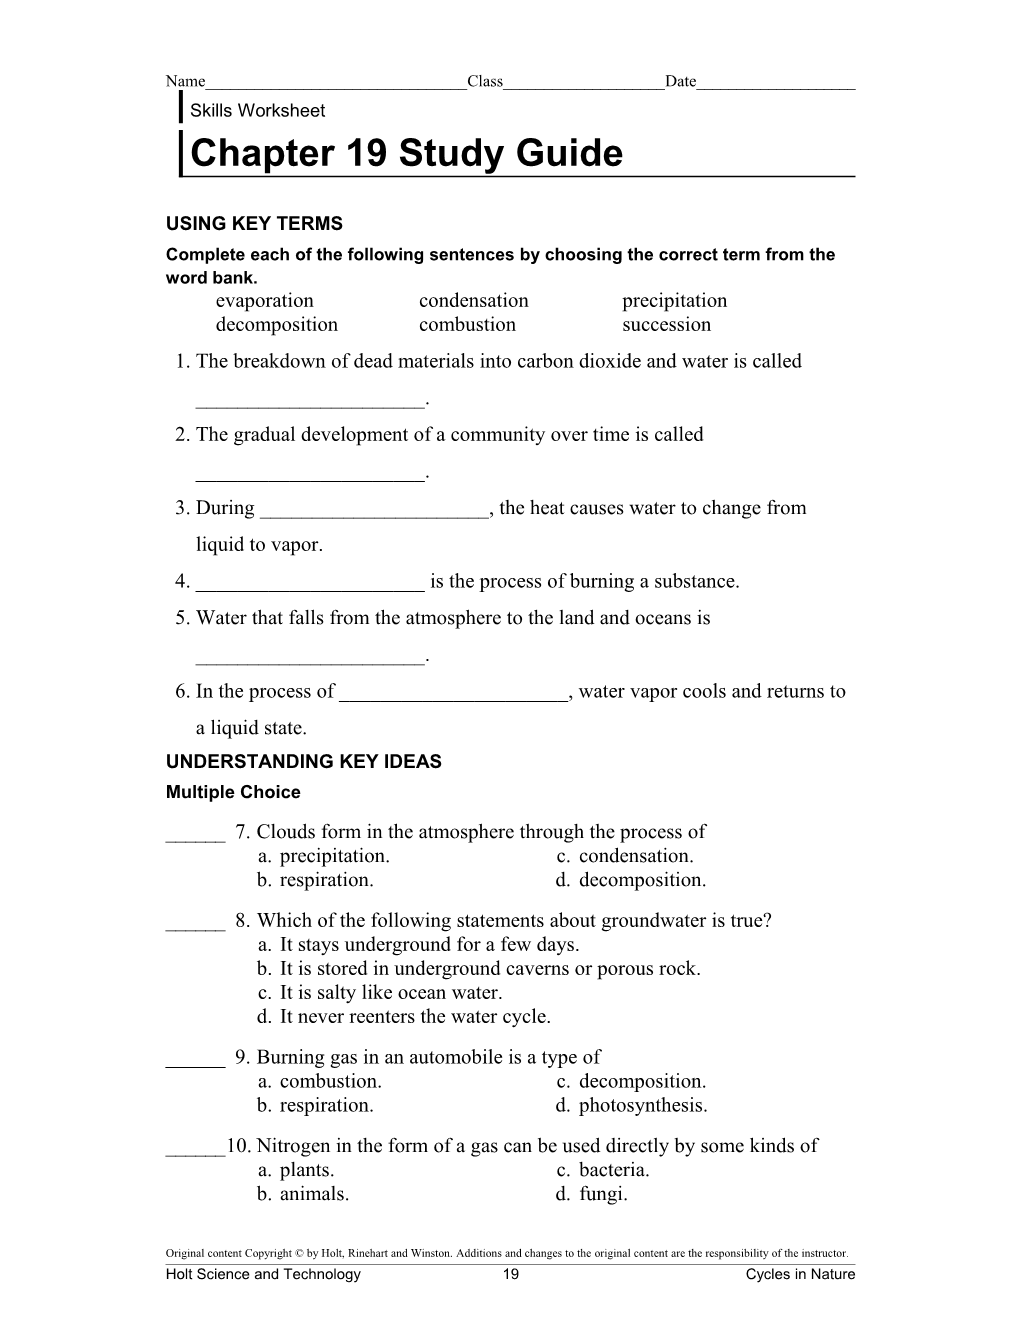 Chapter 19 Study Guide